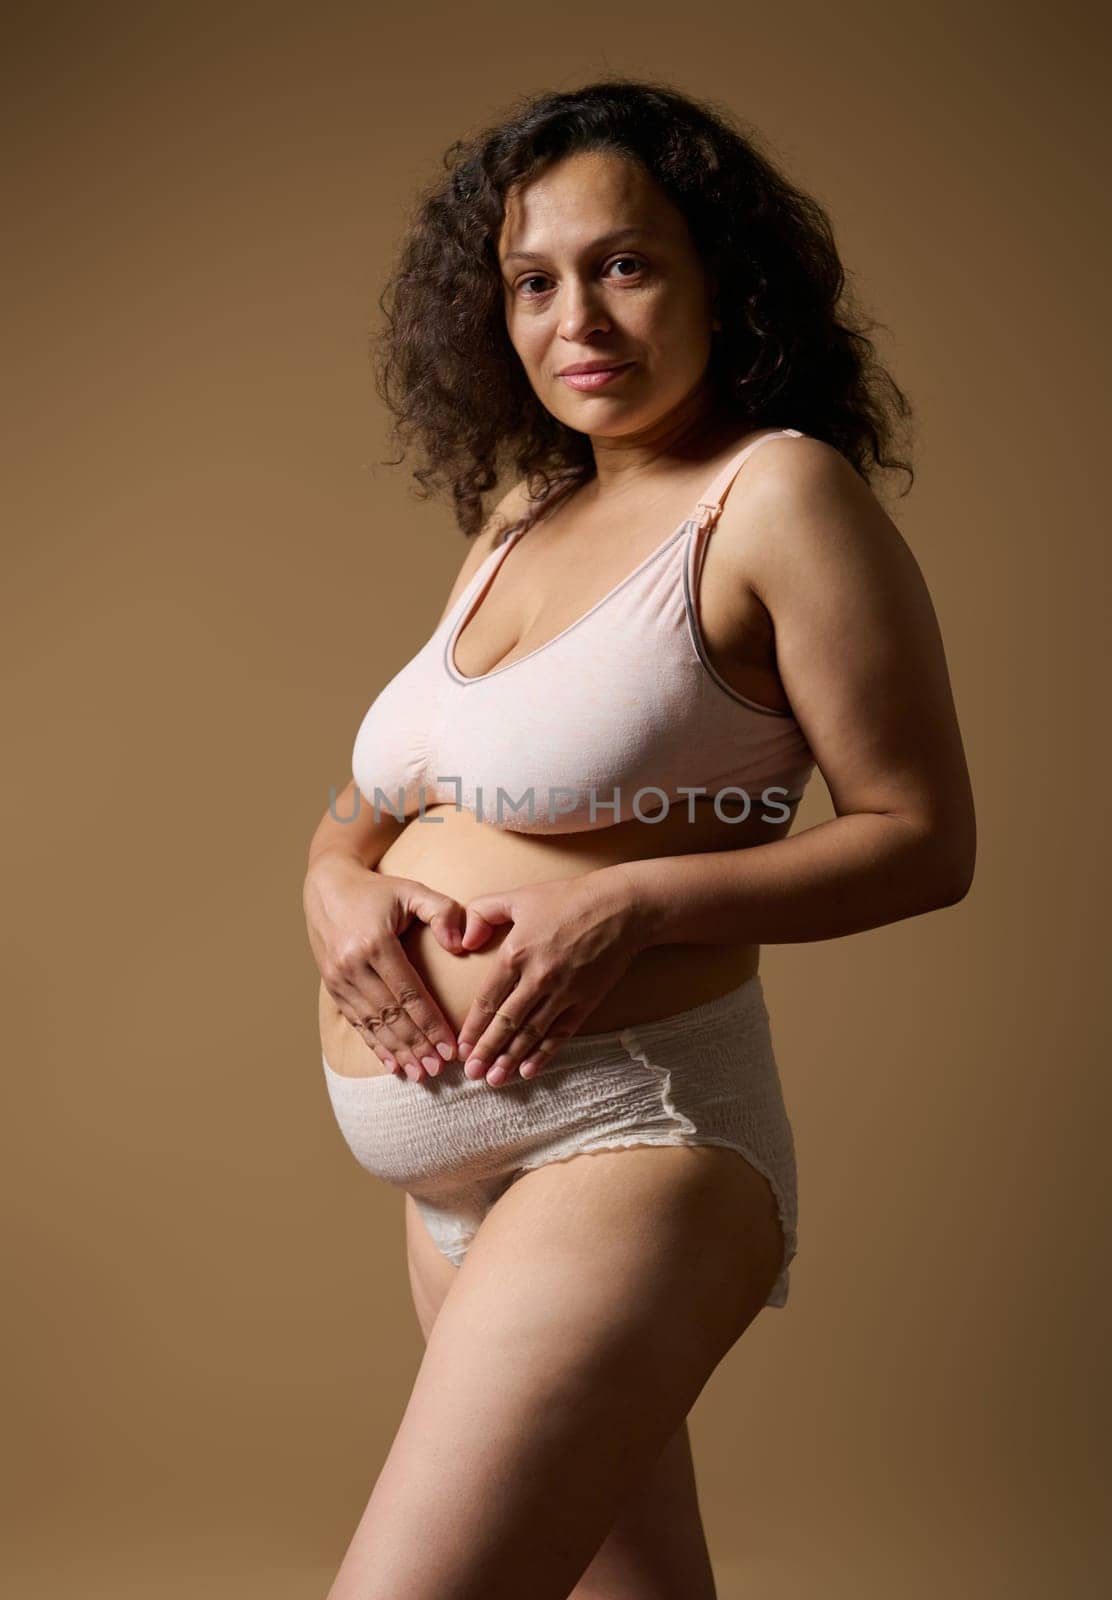 Confident woman in underwear, making heart shape over her postnatal belly, expressing confidence looking at camera. Mother with visible postpartum body marks, isolated on beige background